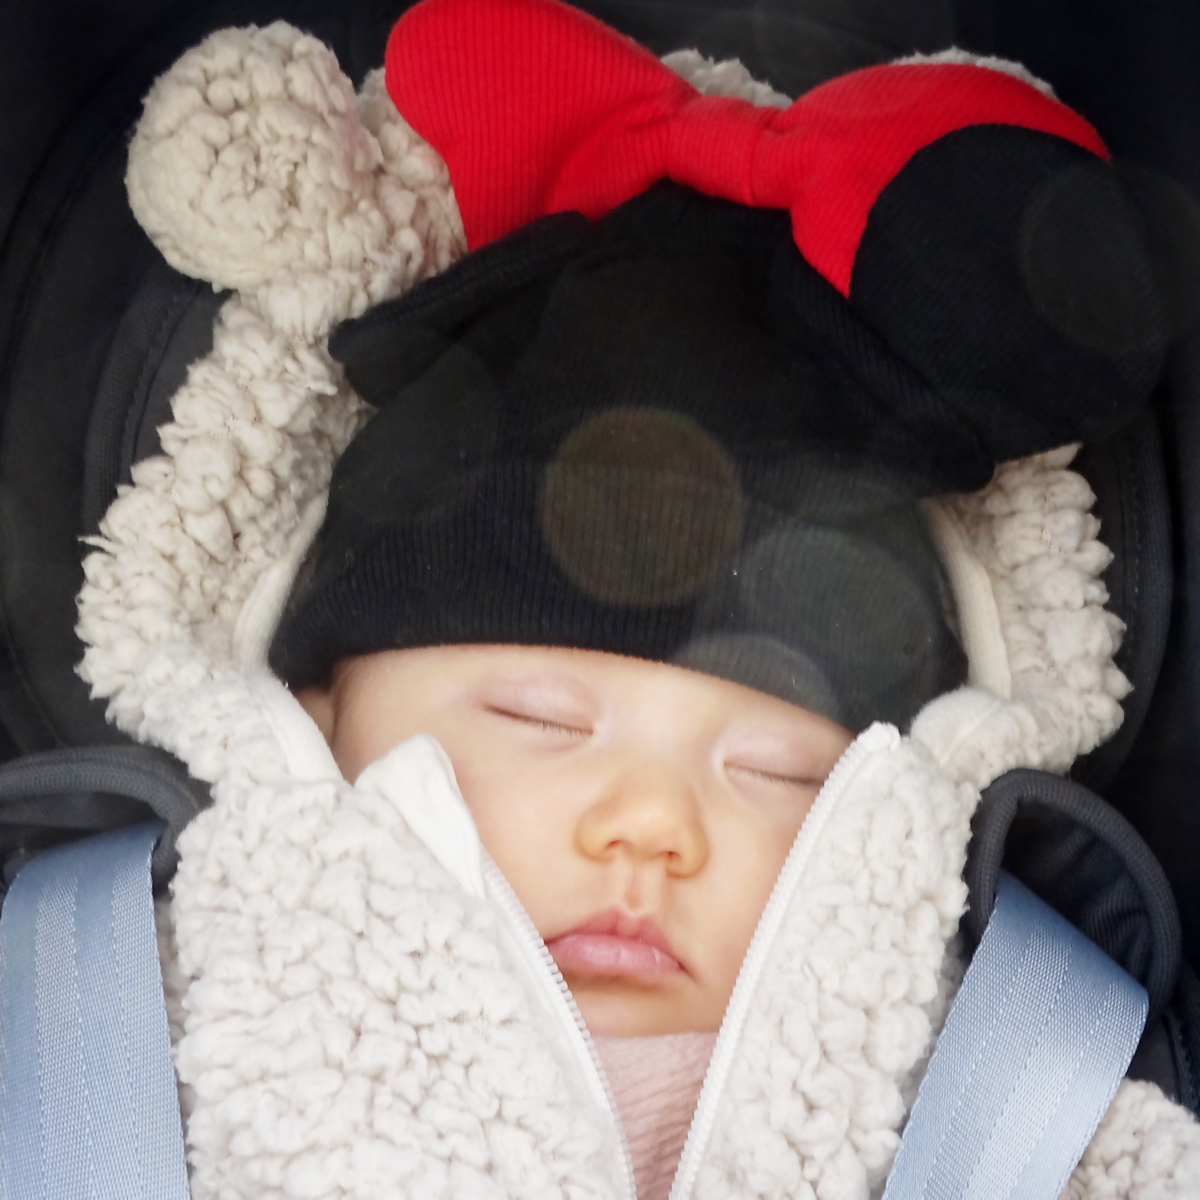 Minnie Mouse is Dreaming